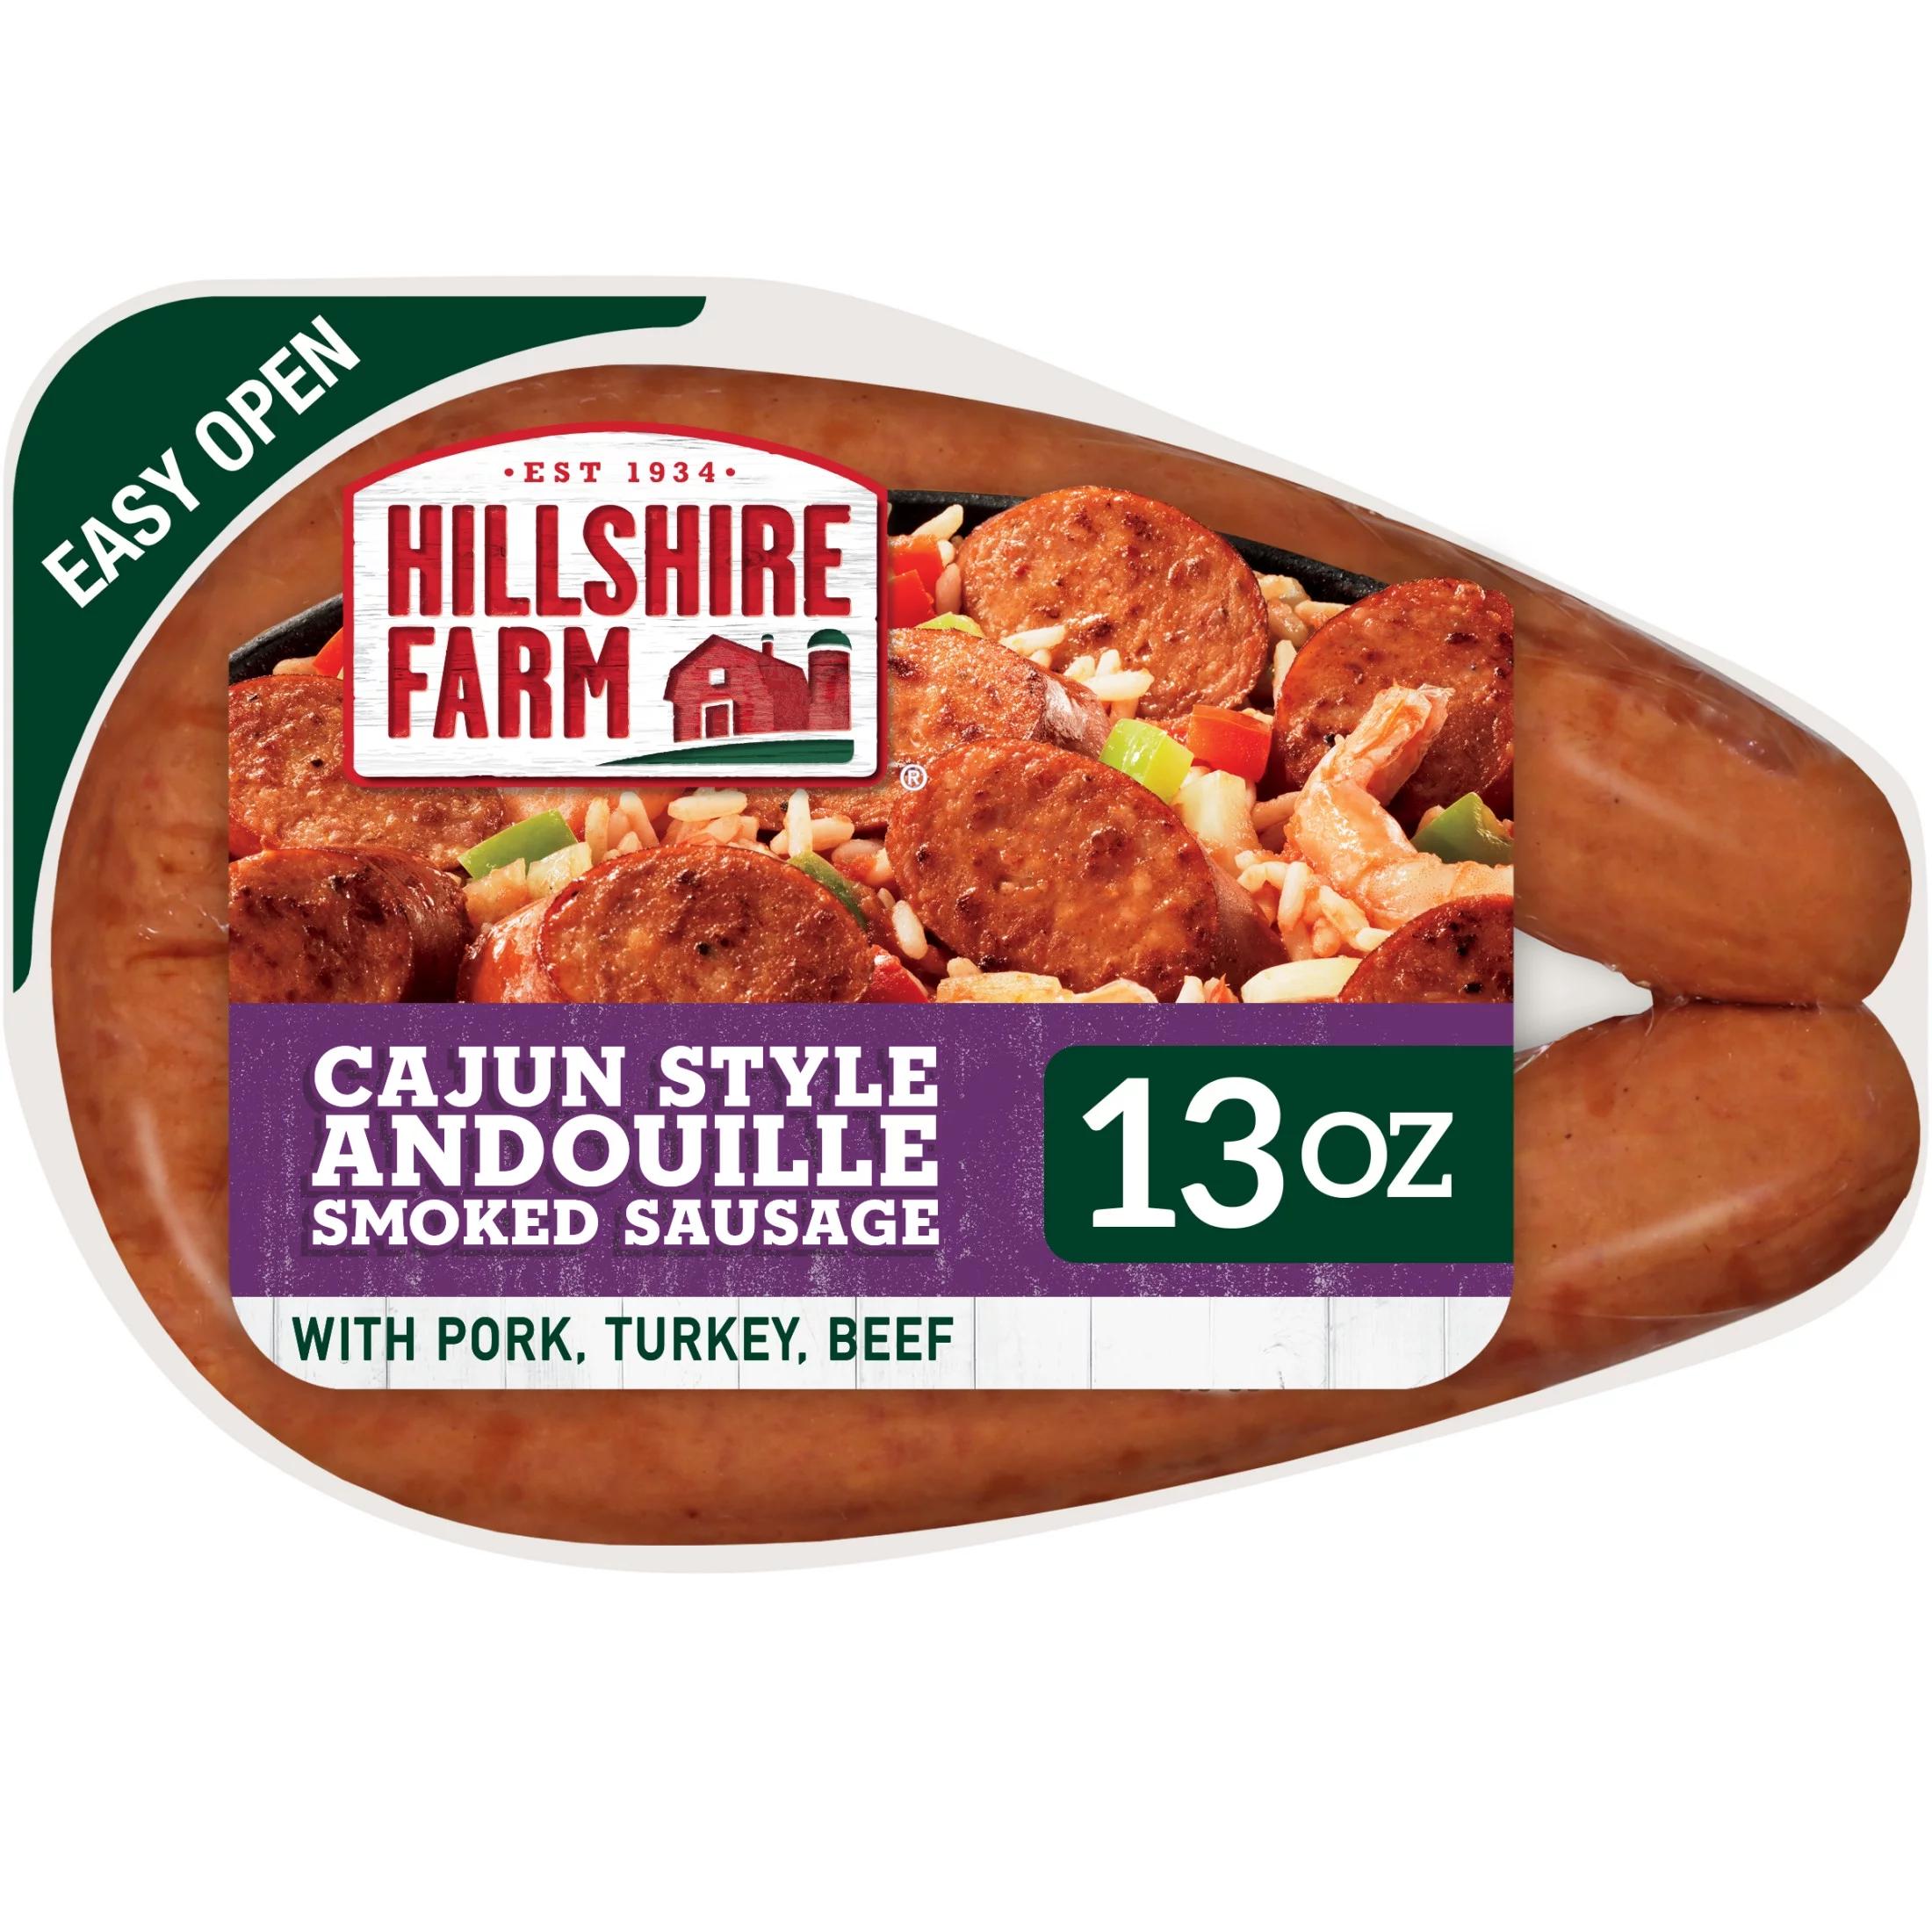 where to buy smoked andouille sausage - Can you get andouille sausage in the UK